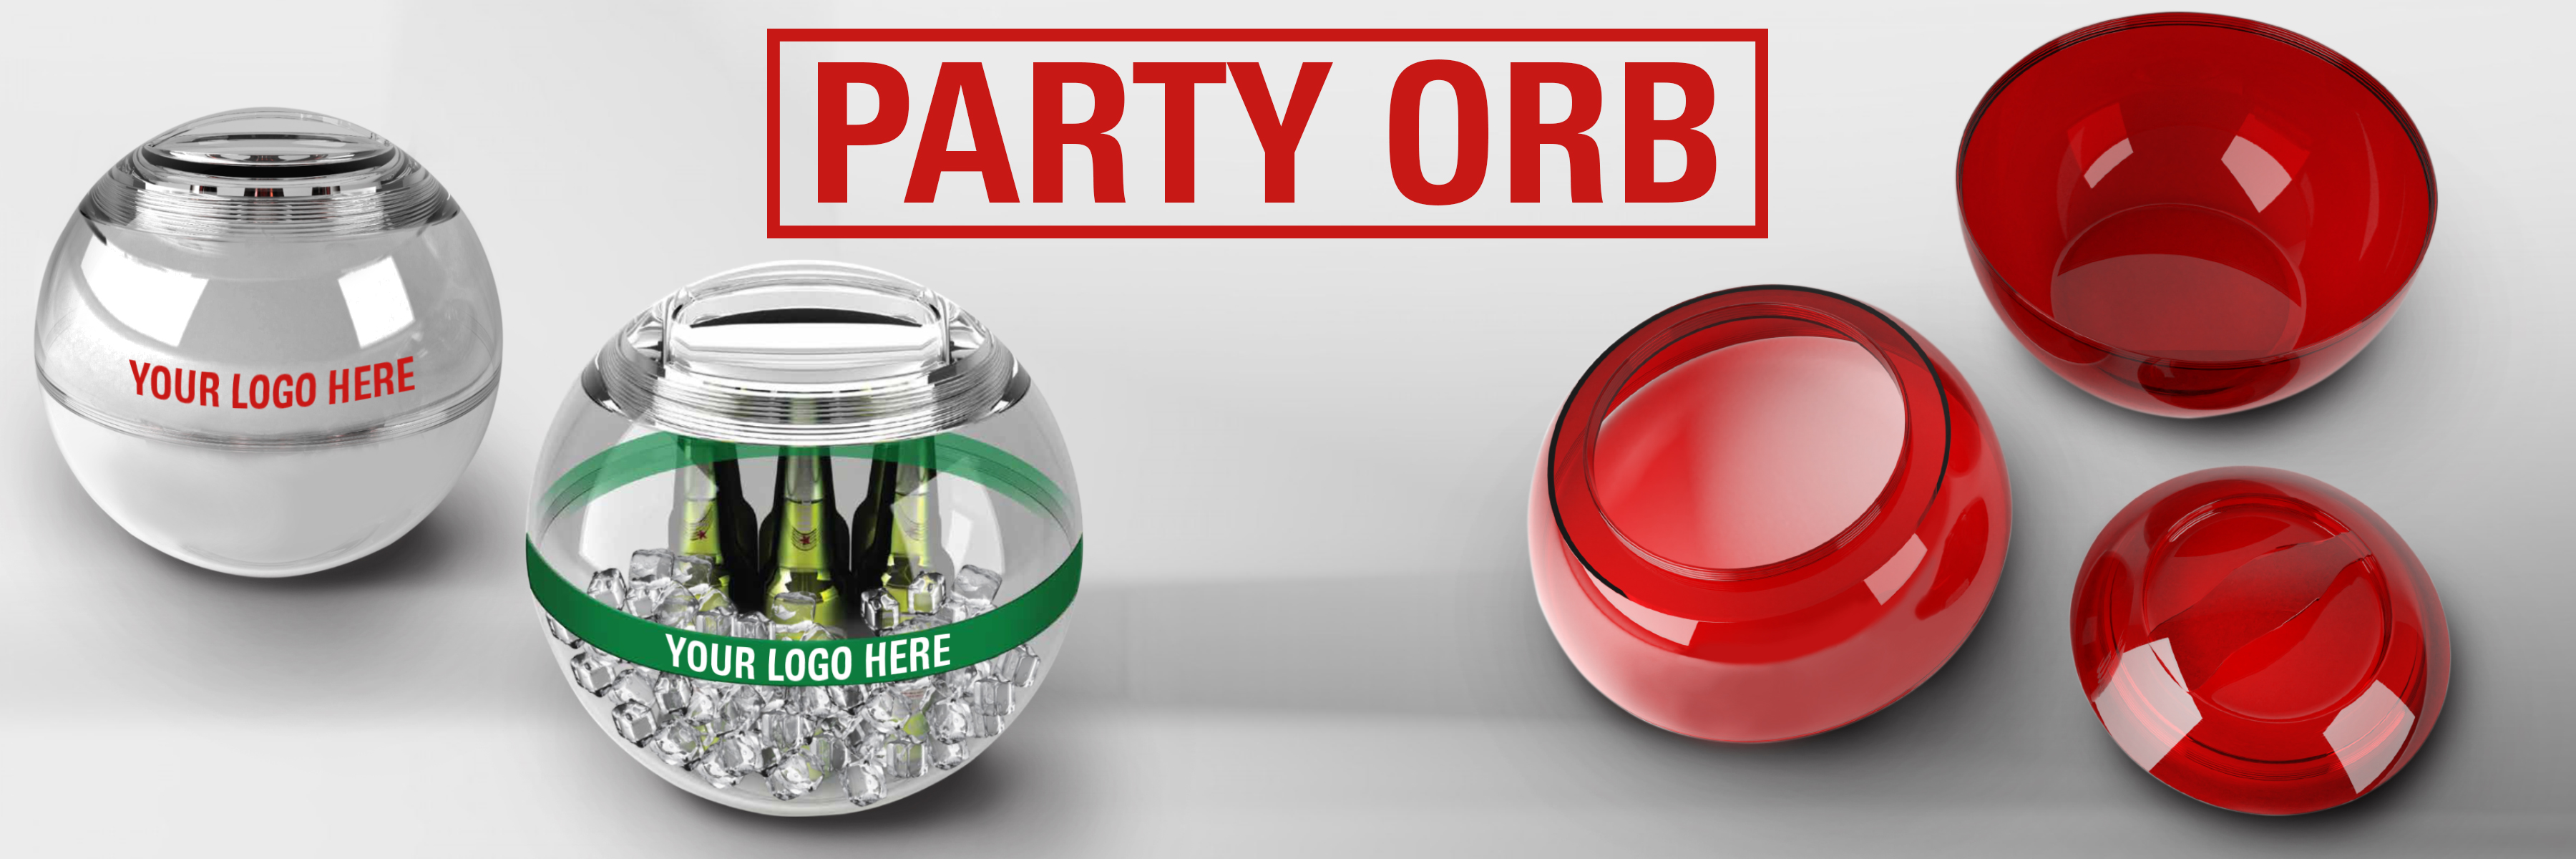 Party Orb